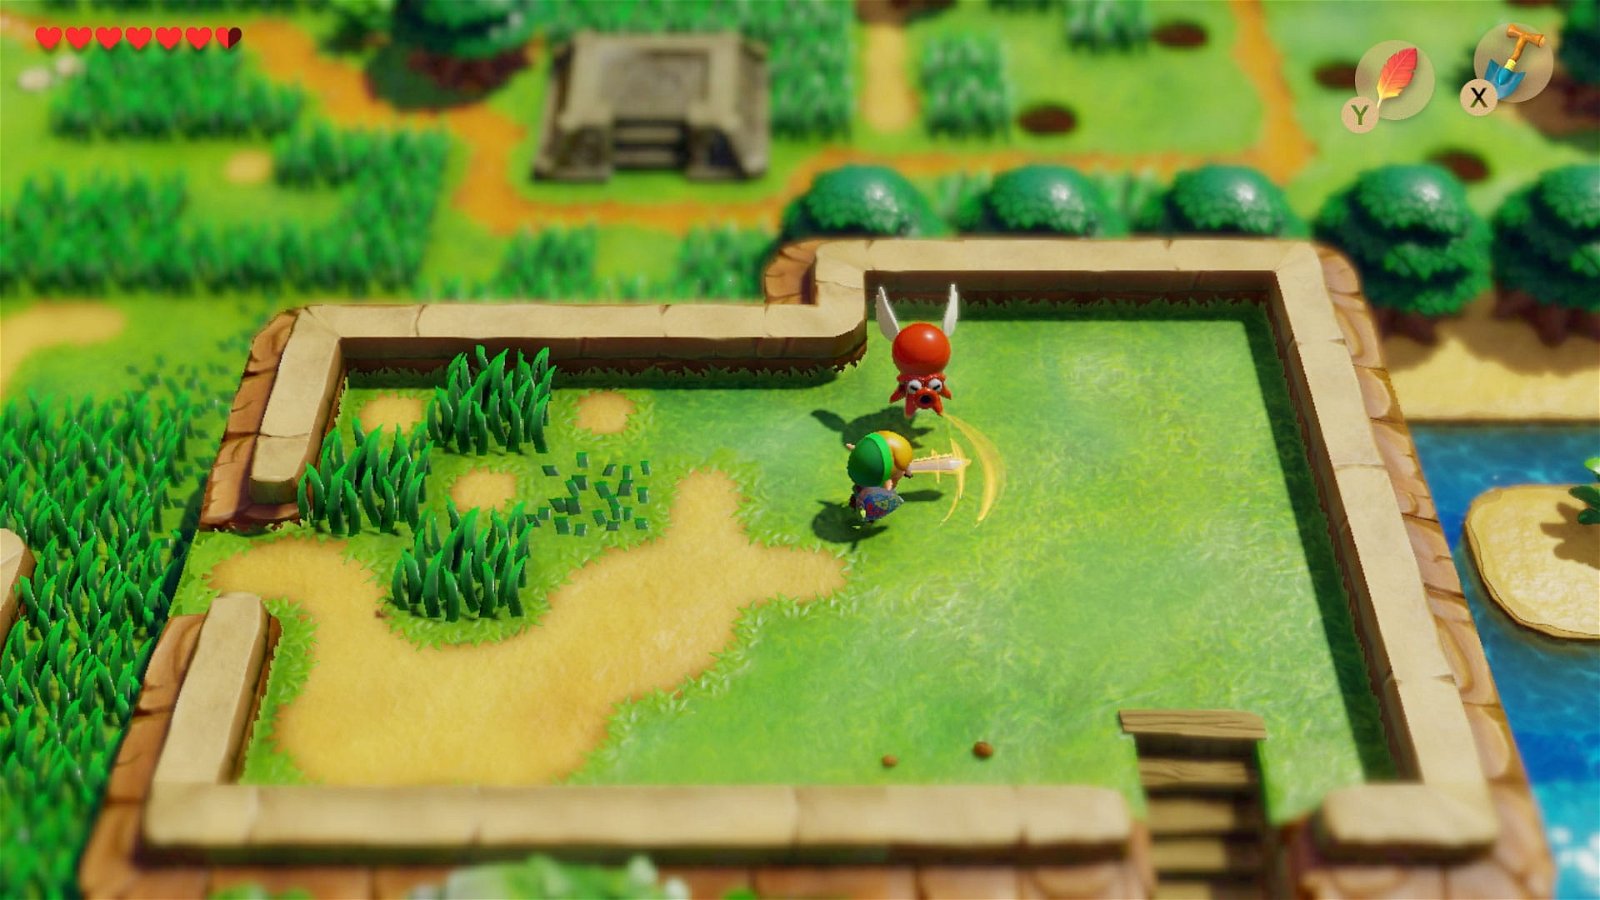 The Legend of Zelda: Link's Awakening comes with double-sided